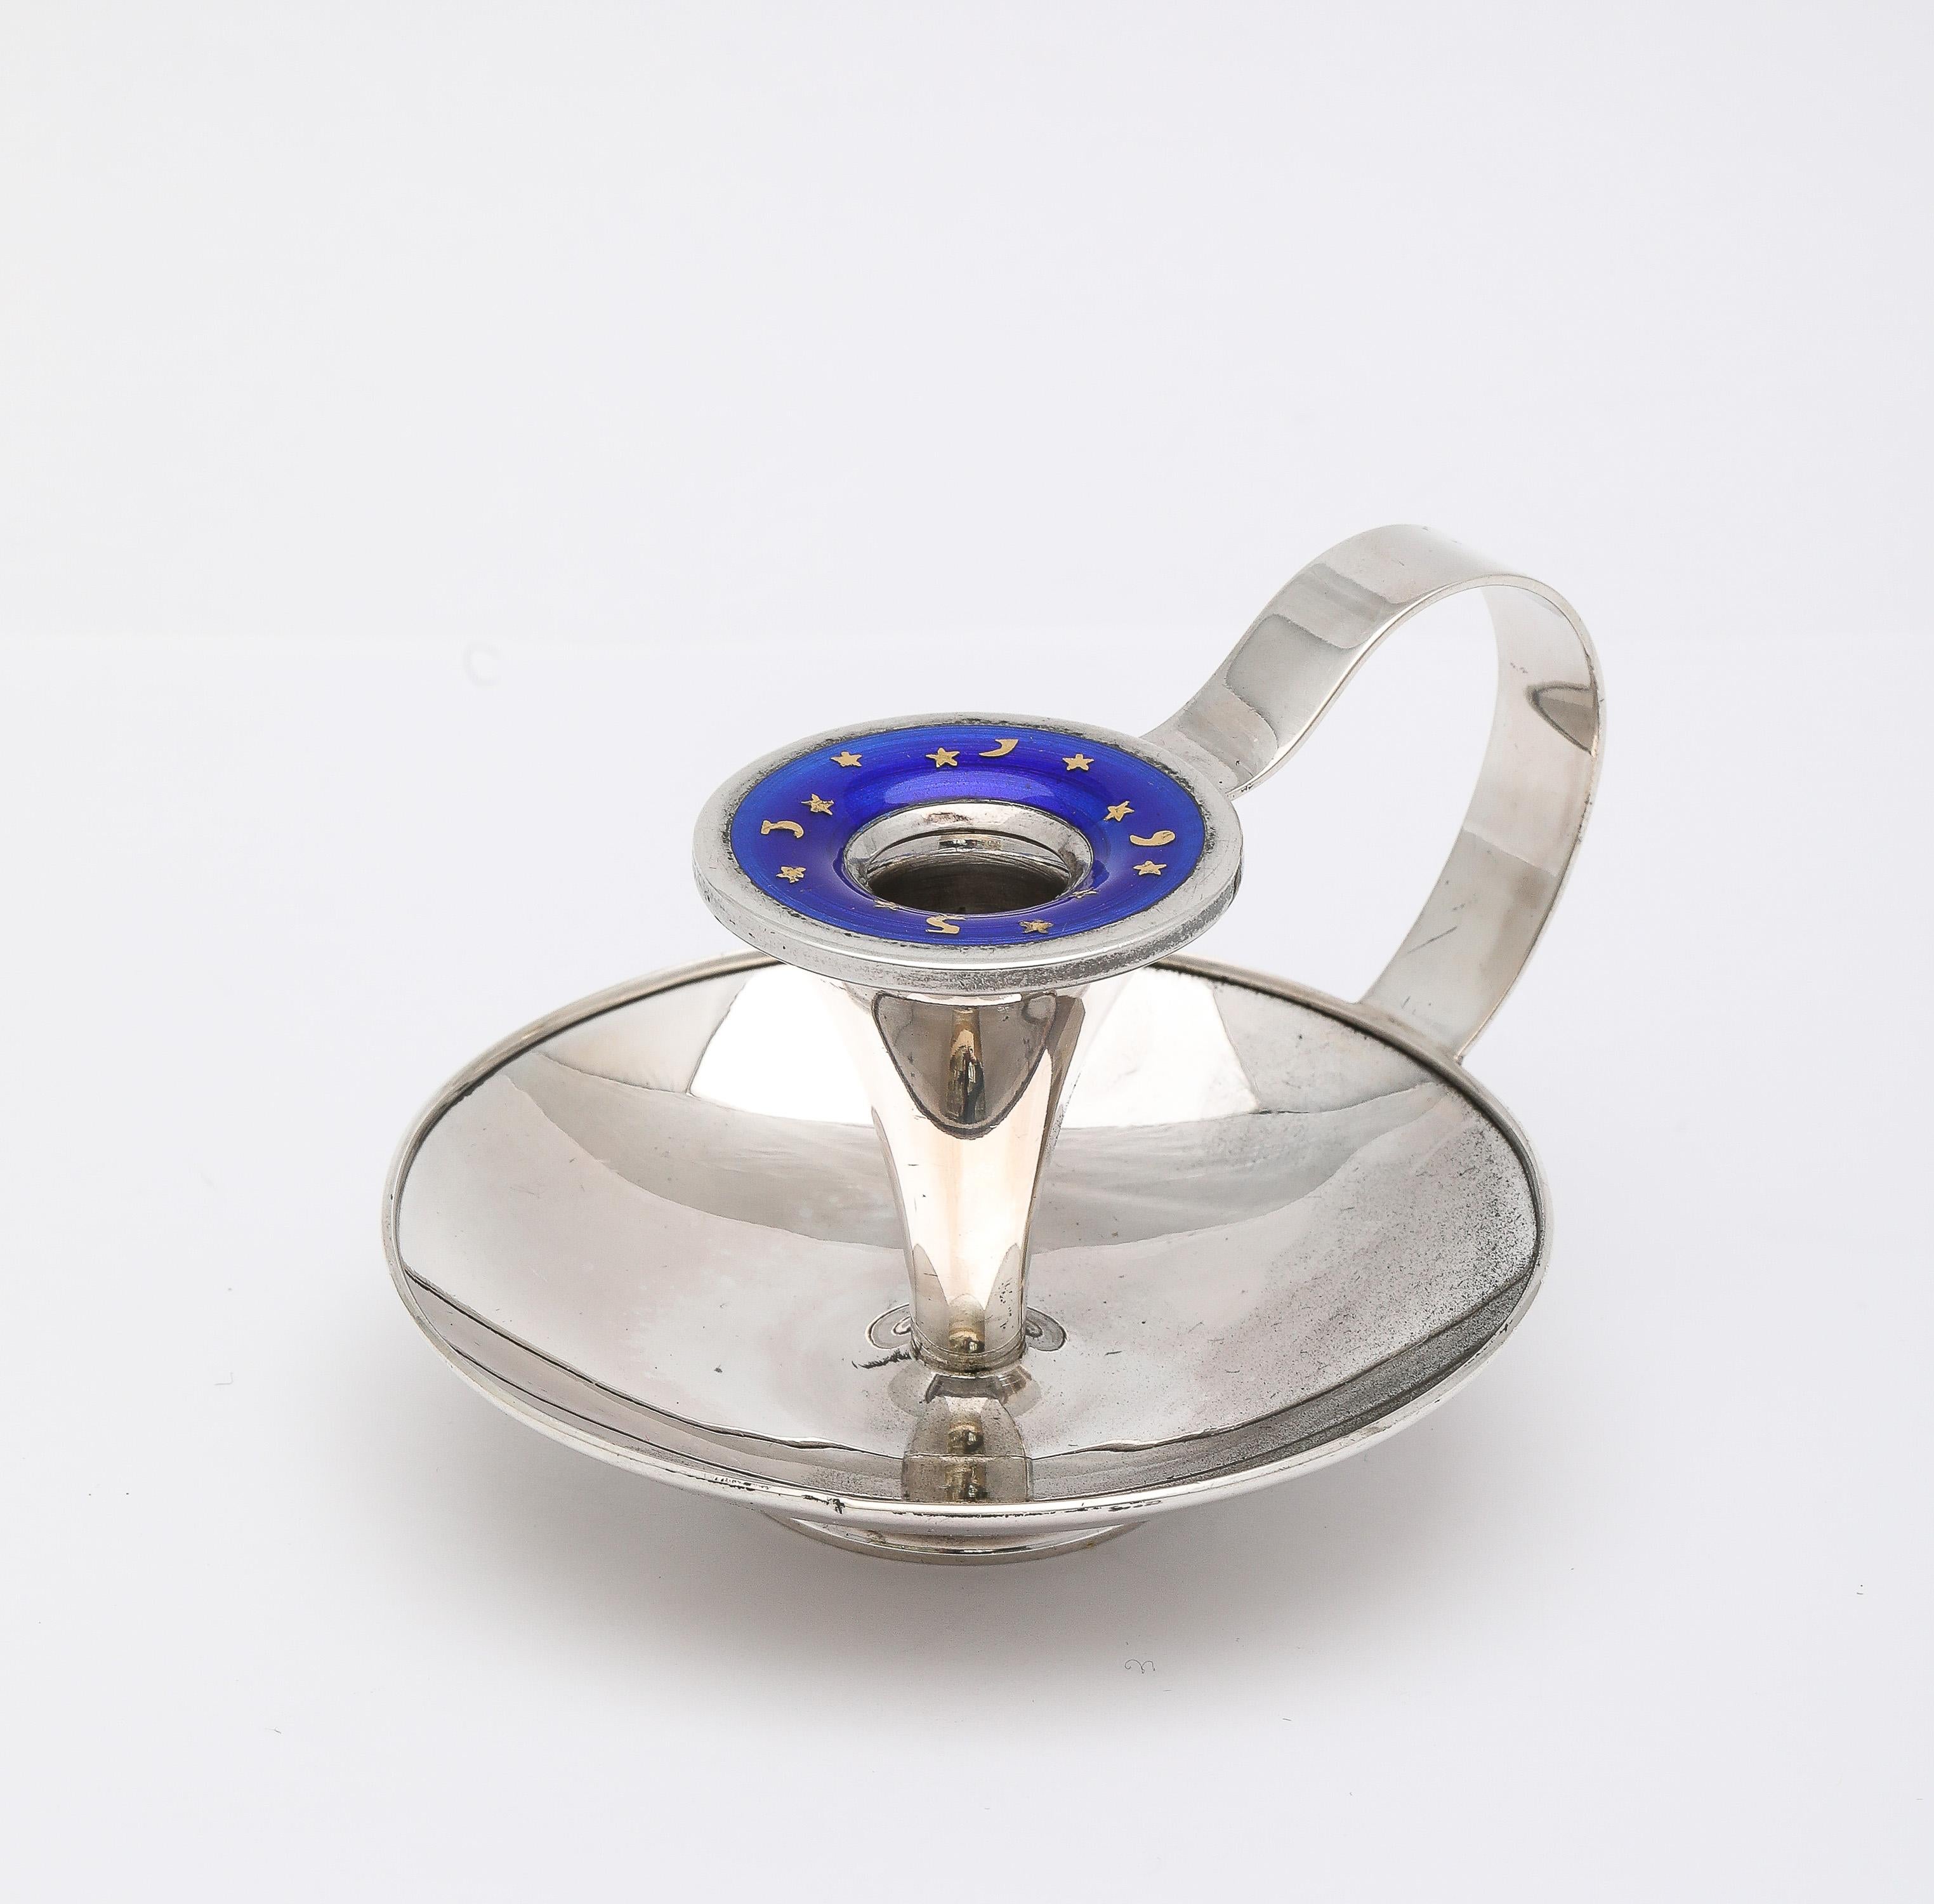 Lovely, unusual, sterling silver and cobalt blue and gold enamel chamberstick, Copenhagen, Denmark, Ca. 1940's, A. Dragsted - maker. The cobalt blue and gold enamel rim of the candle cup is removable (see photos). Graceful design. The chamberstick